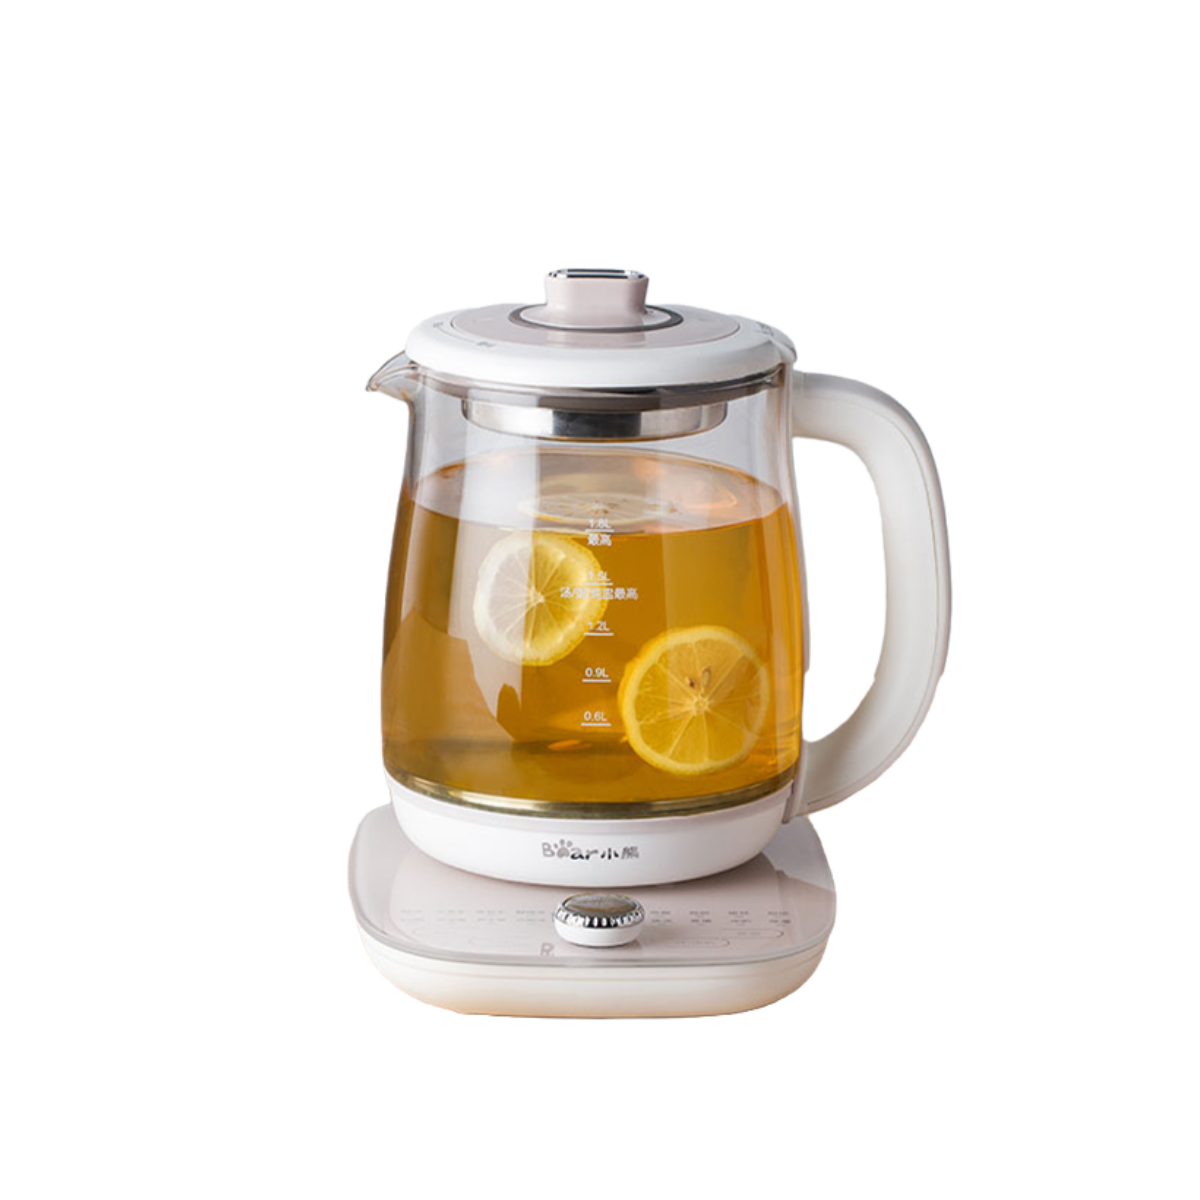 Bear YSH-C18S2 Health Pot, Electric Kettle Tea Maker with Infuser